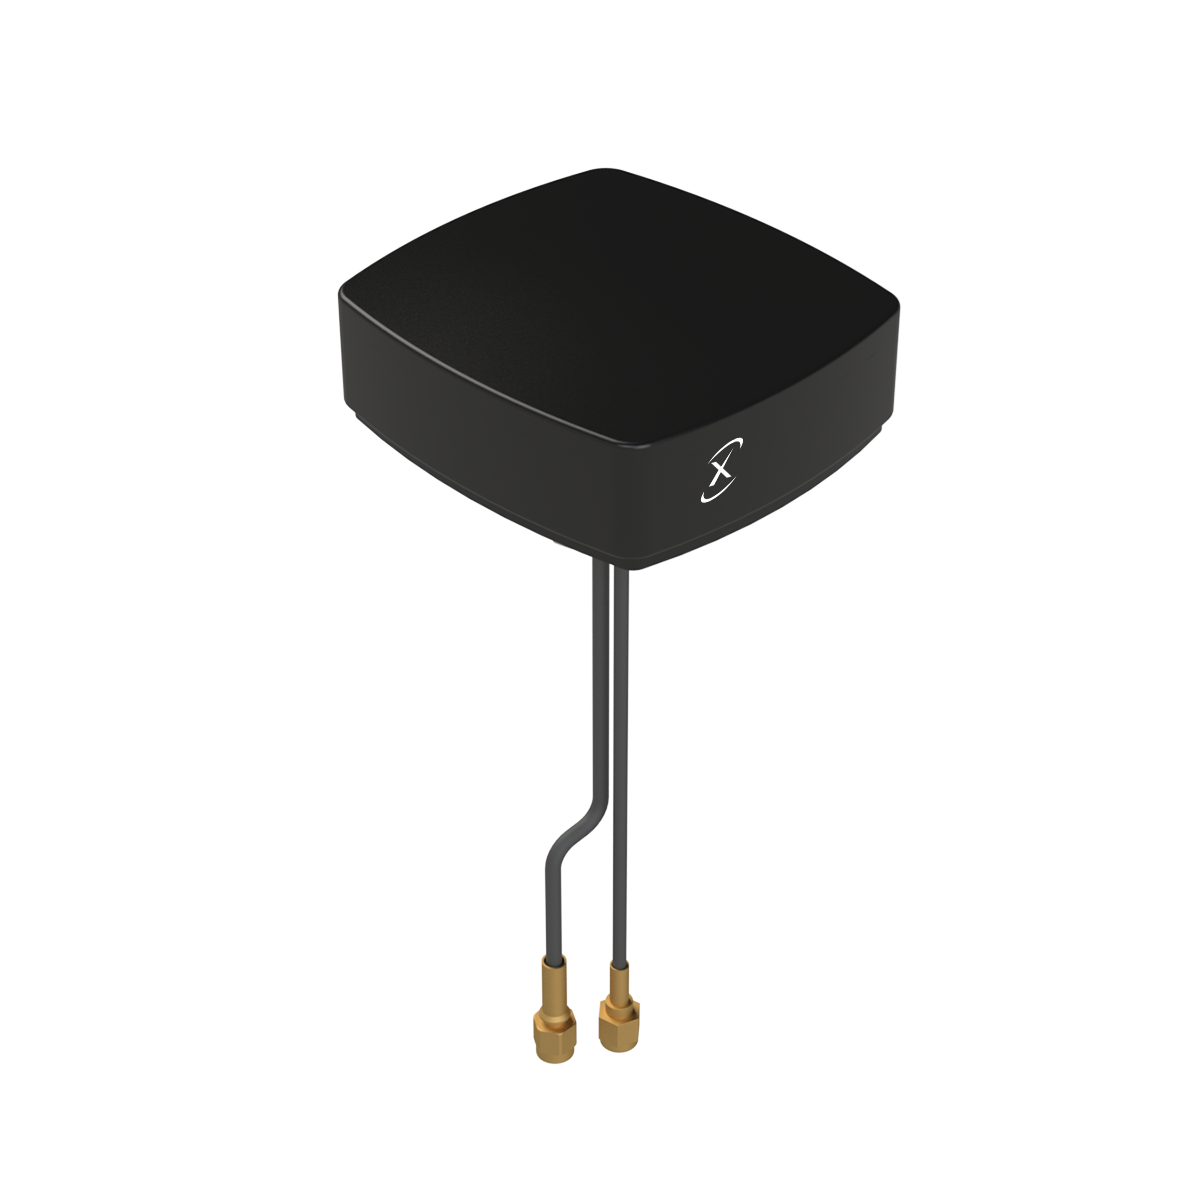 Cellular/LTE AND 2.4/5.0 GHz ISM  antenna